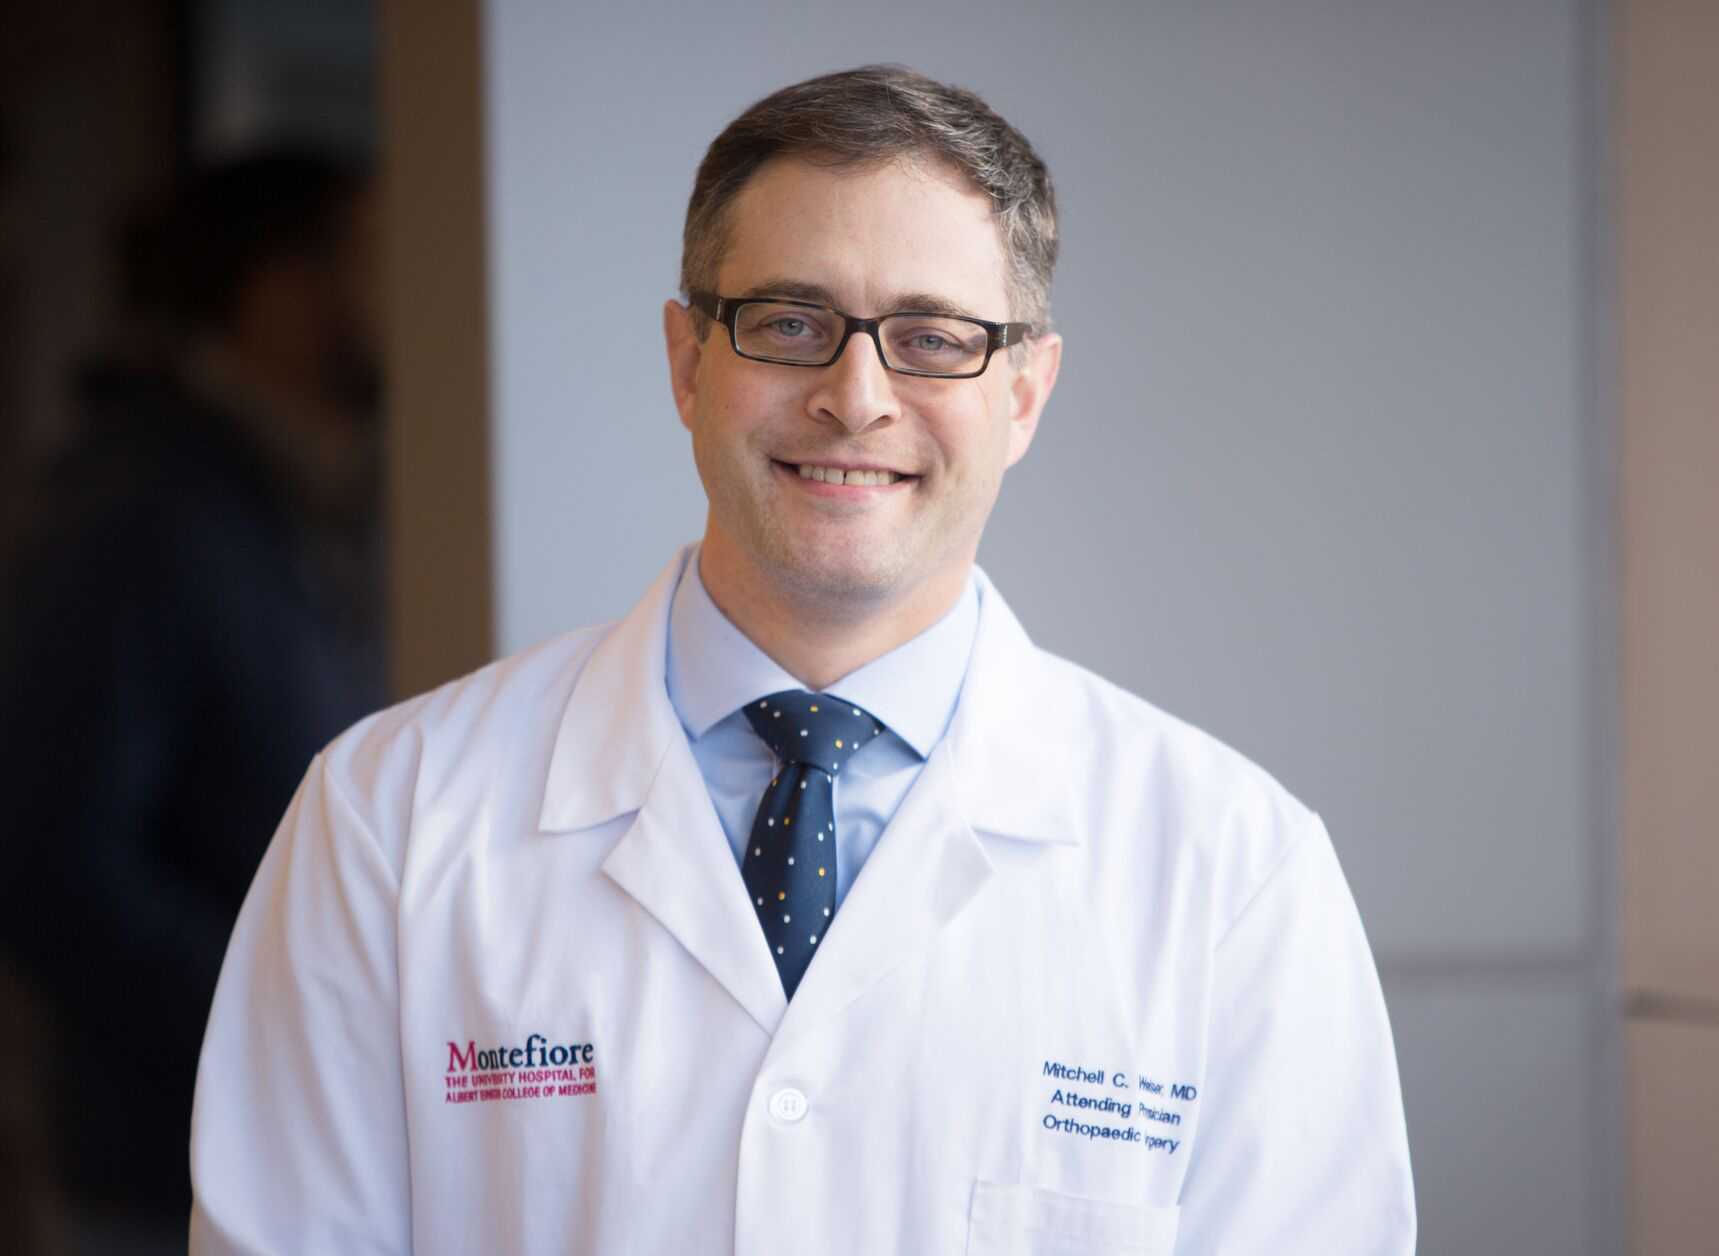 Dr. Weiser leads Adult Reconstruction Fellowship to a successful inaugural year